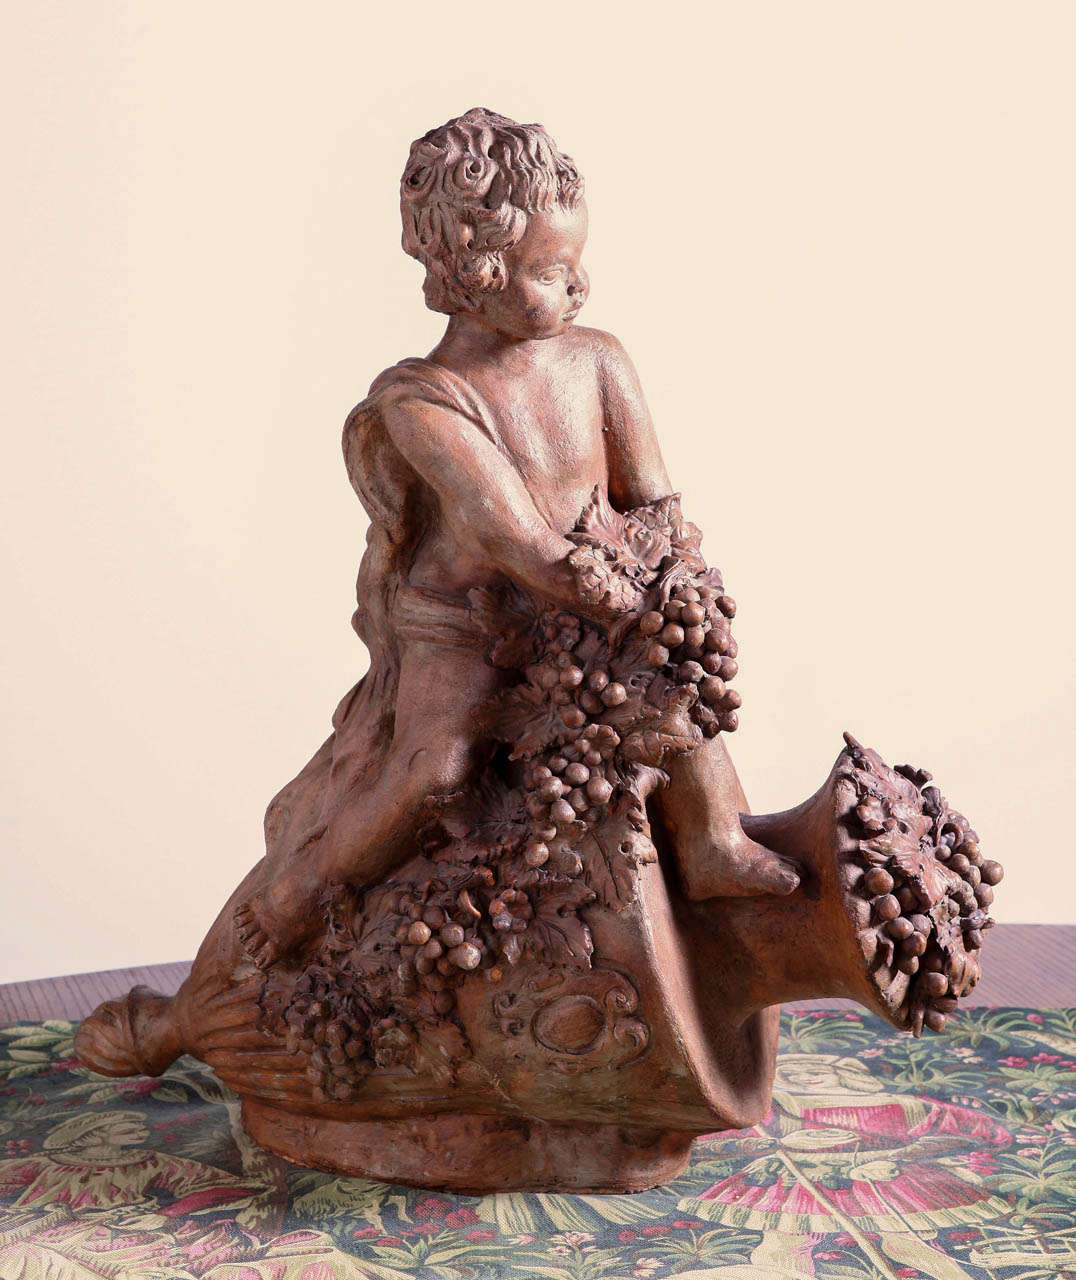 This antique French statue has been made from terra cotta clay.  It came from an old wine property in the Bordeaux region of France and dates to the mid 1800’s.  It depicts a Bacchanalian putti resting atop an urn on its side filled with grapevines